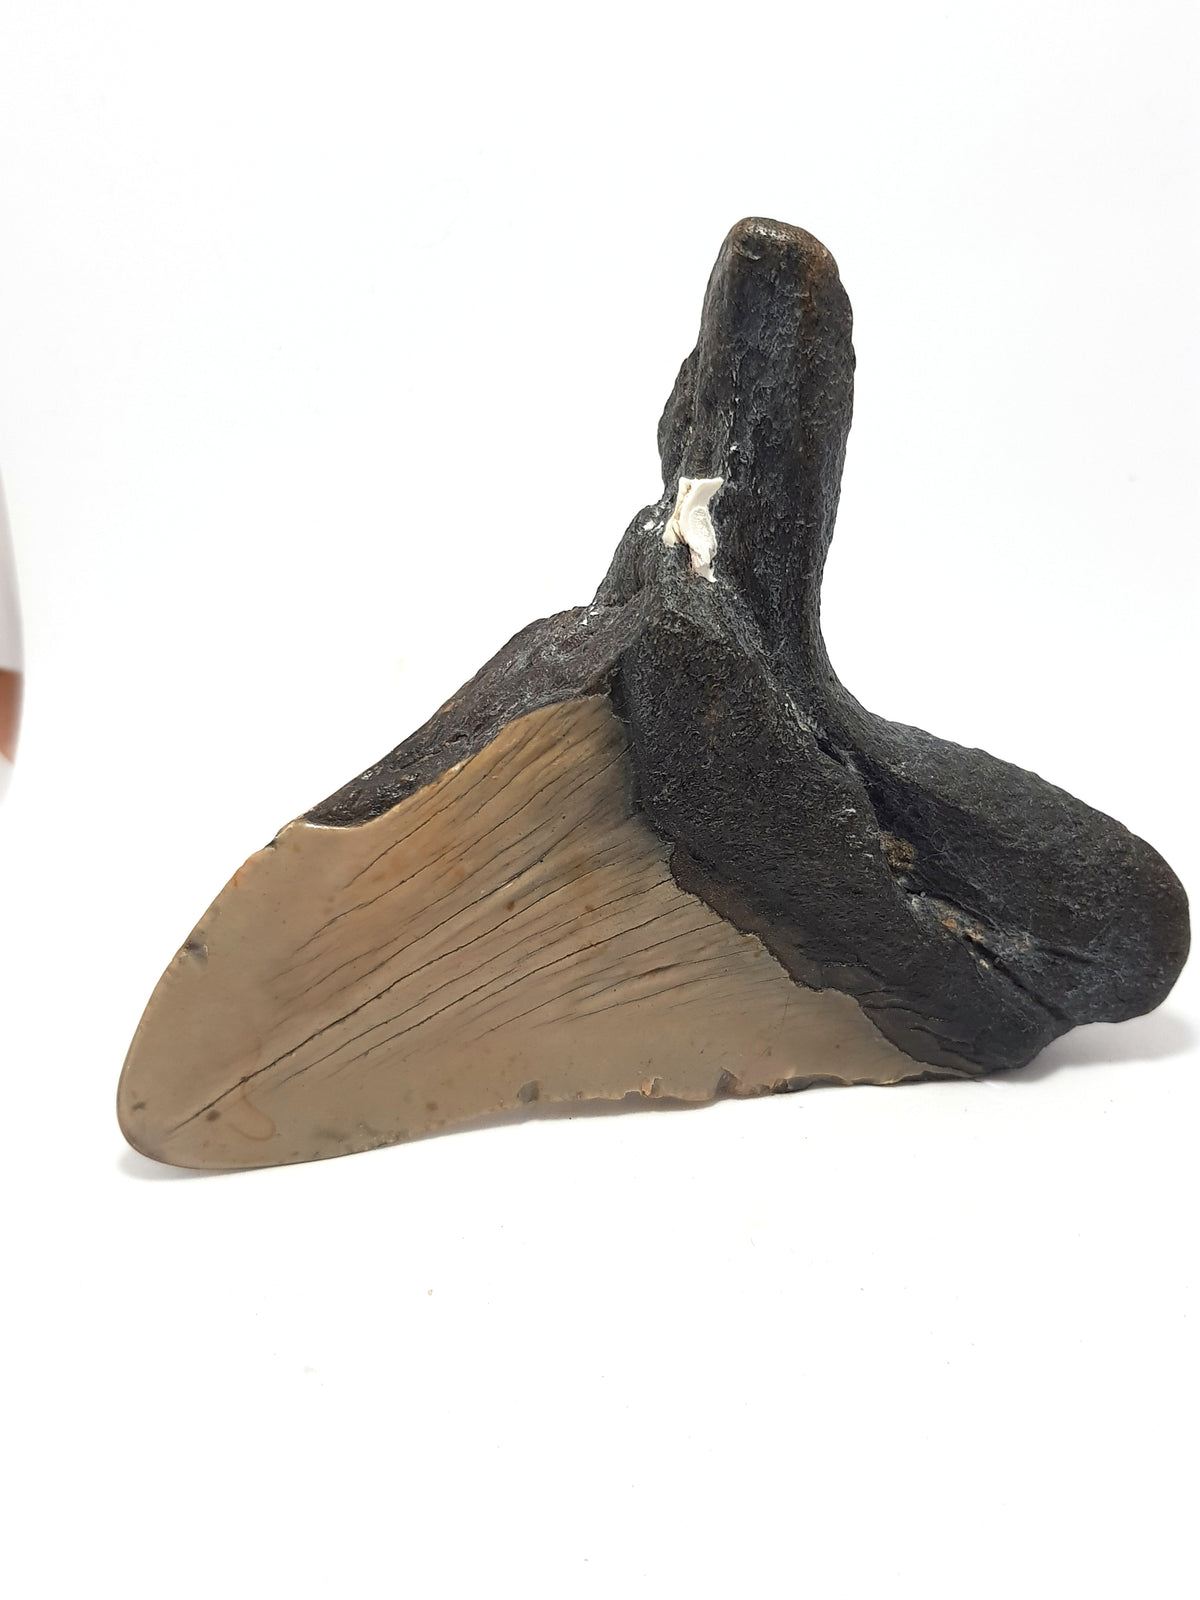 partial megalodon tooth rear view. the enamel is entirely present and is a mushroom colour. the root is black. there is a white barnacle in the root. a section of the left distal crown and root is missing.